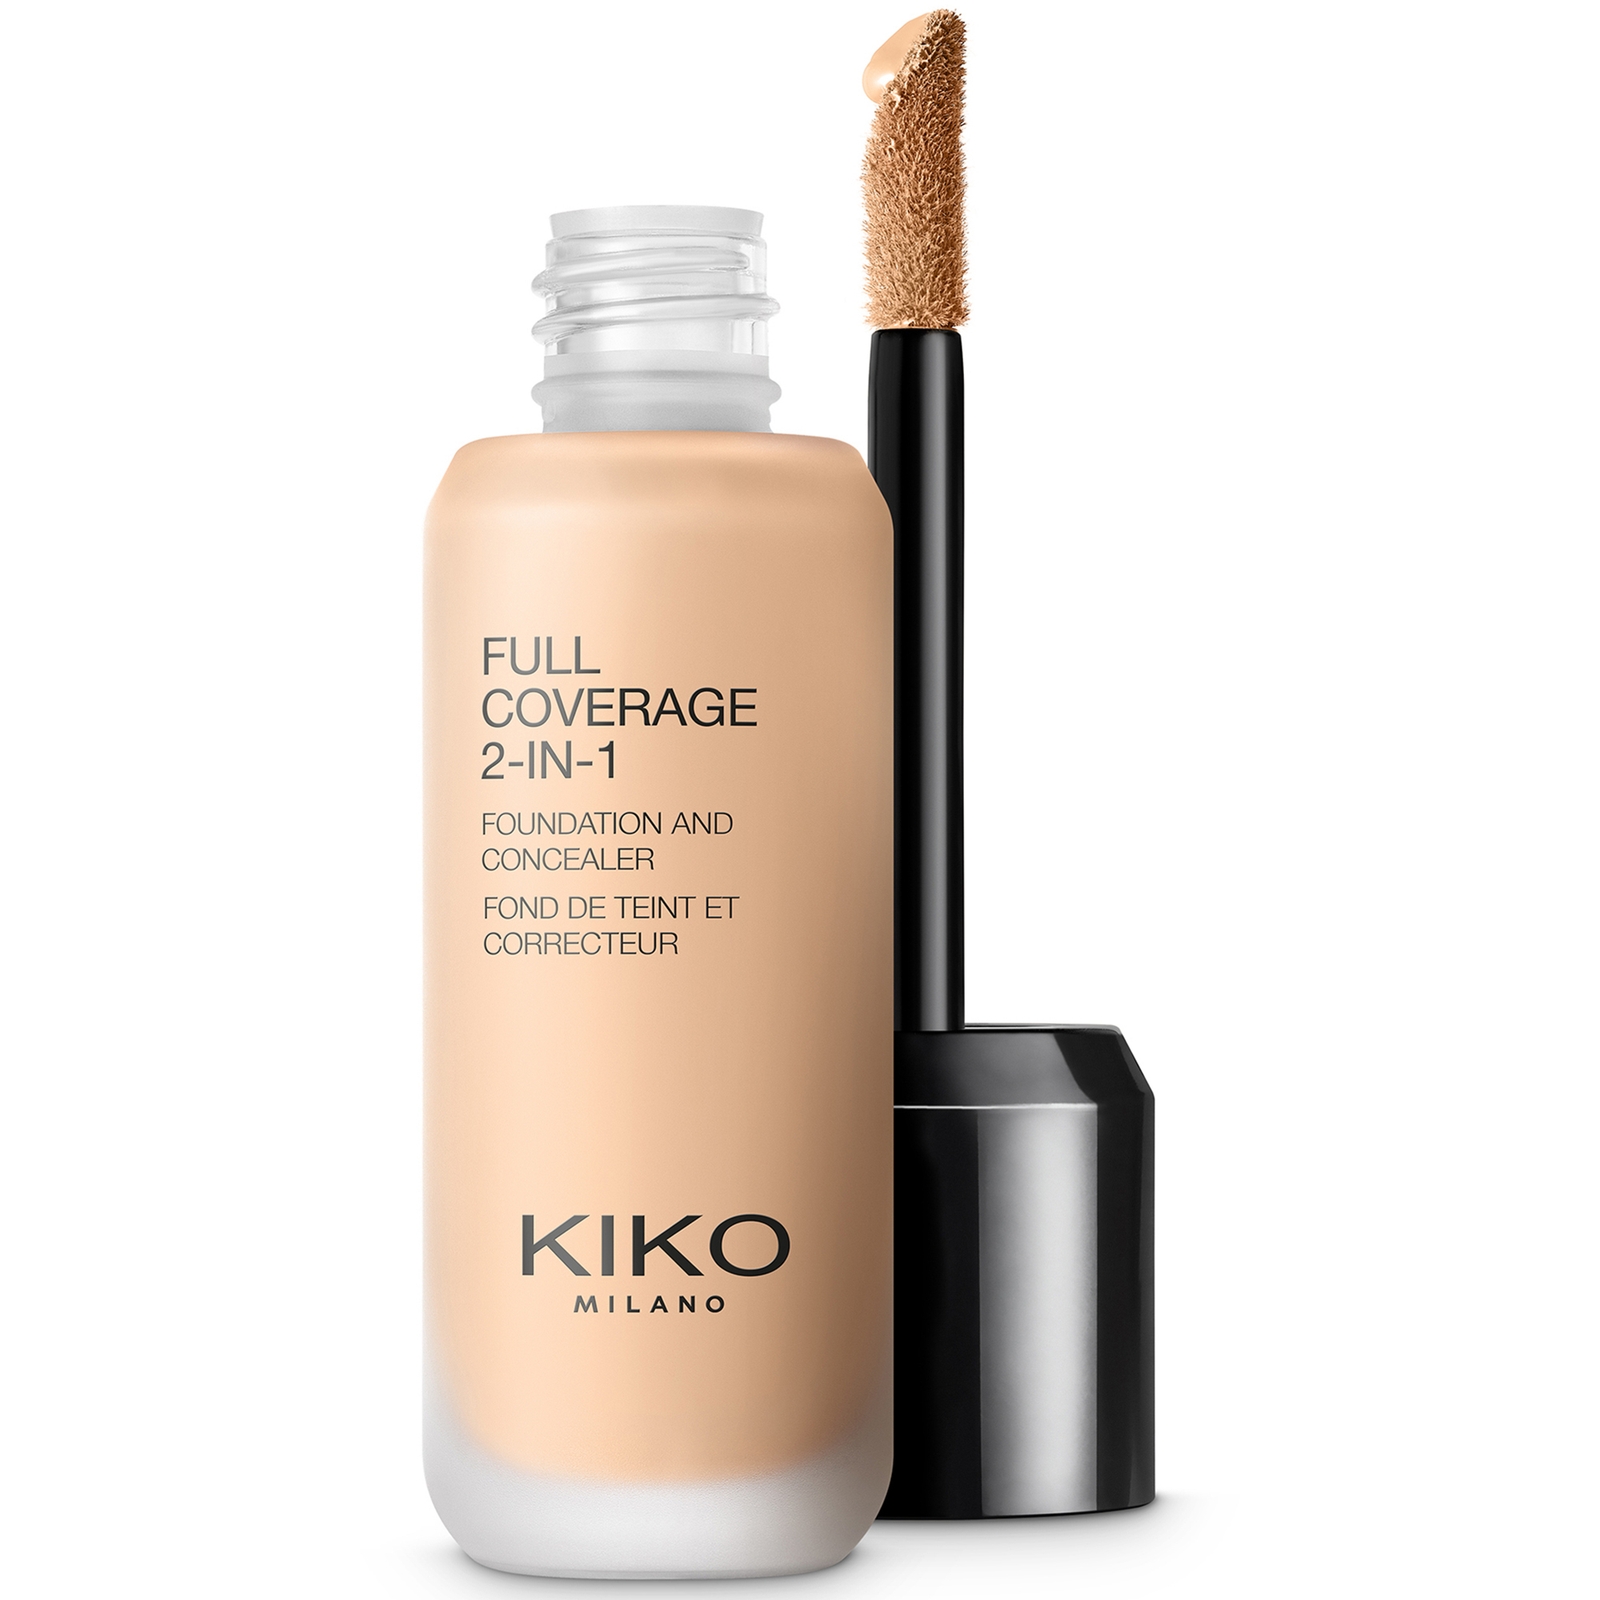 KIKO Milano Full Coverage 2-in-1 Foundation and Concealer 25ml (Various Shades) - 10 Neutral